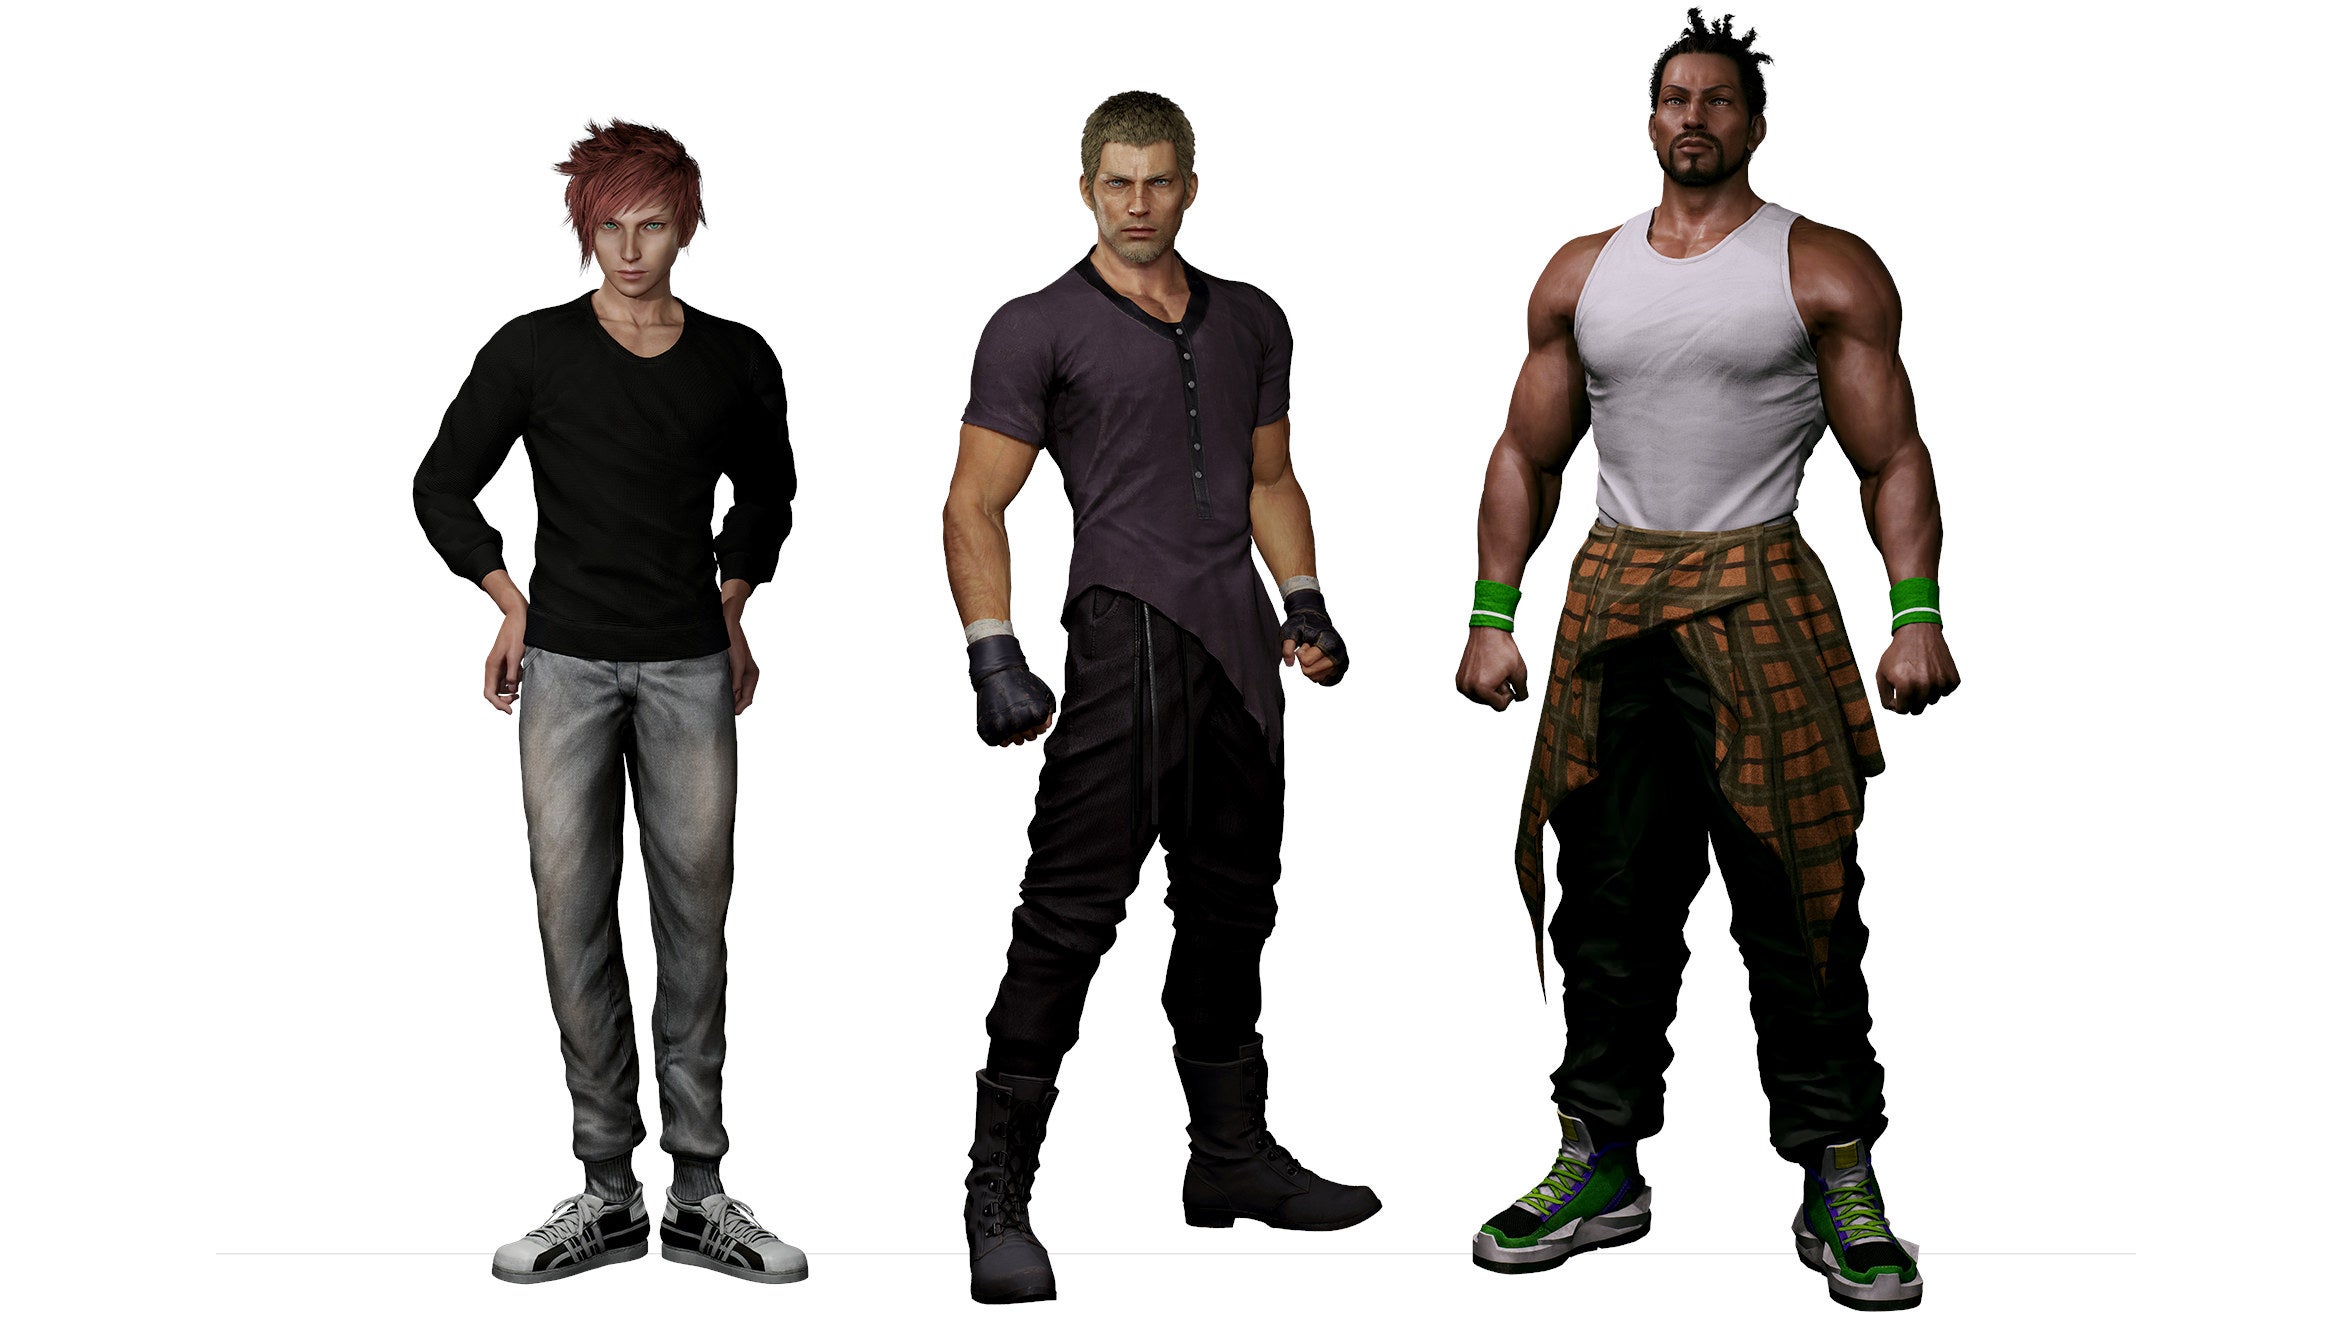 Stranger Of Paradise Final Fantasy Origin character renders showing the party in casual wear.